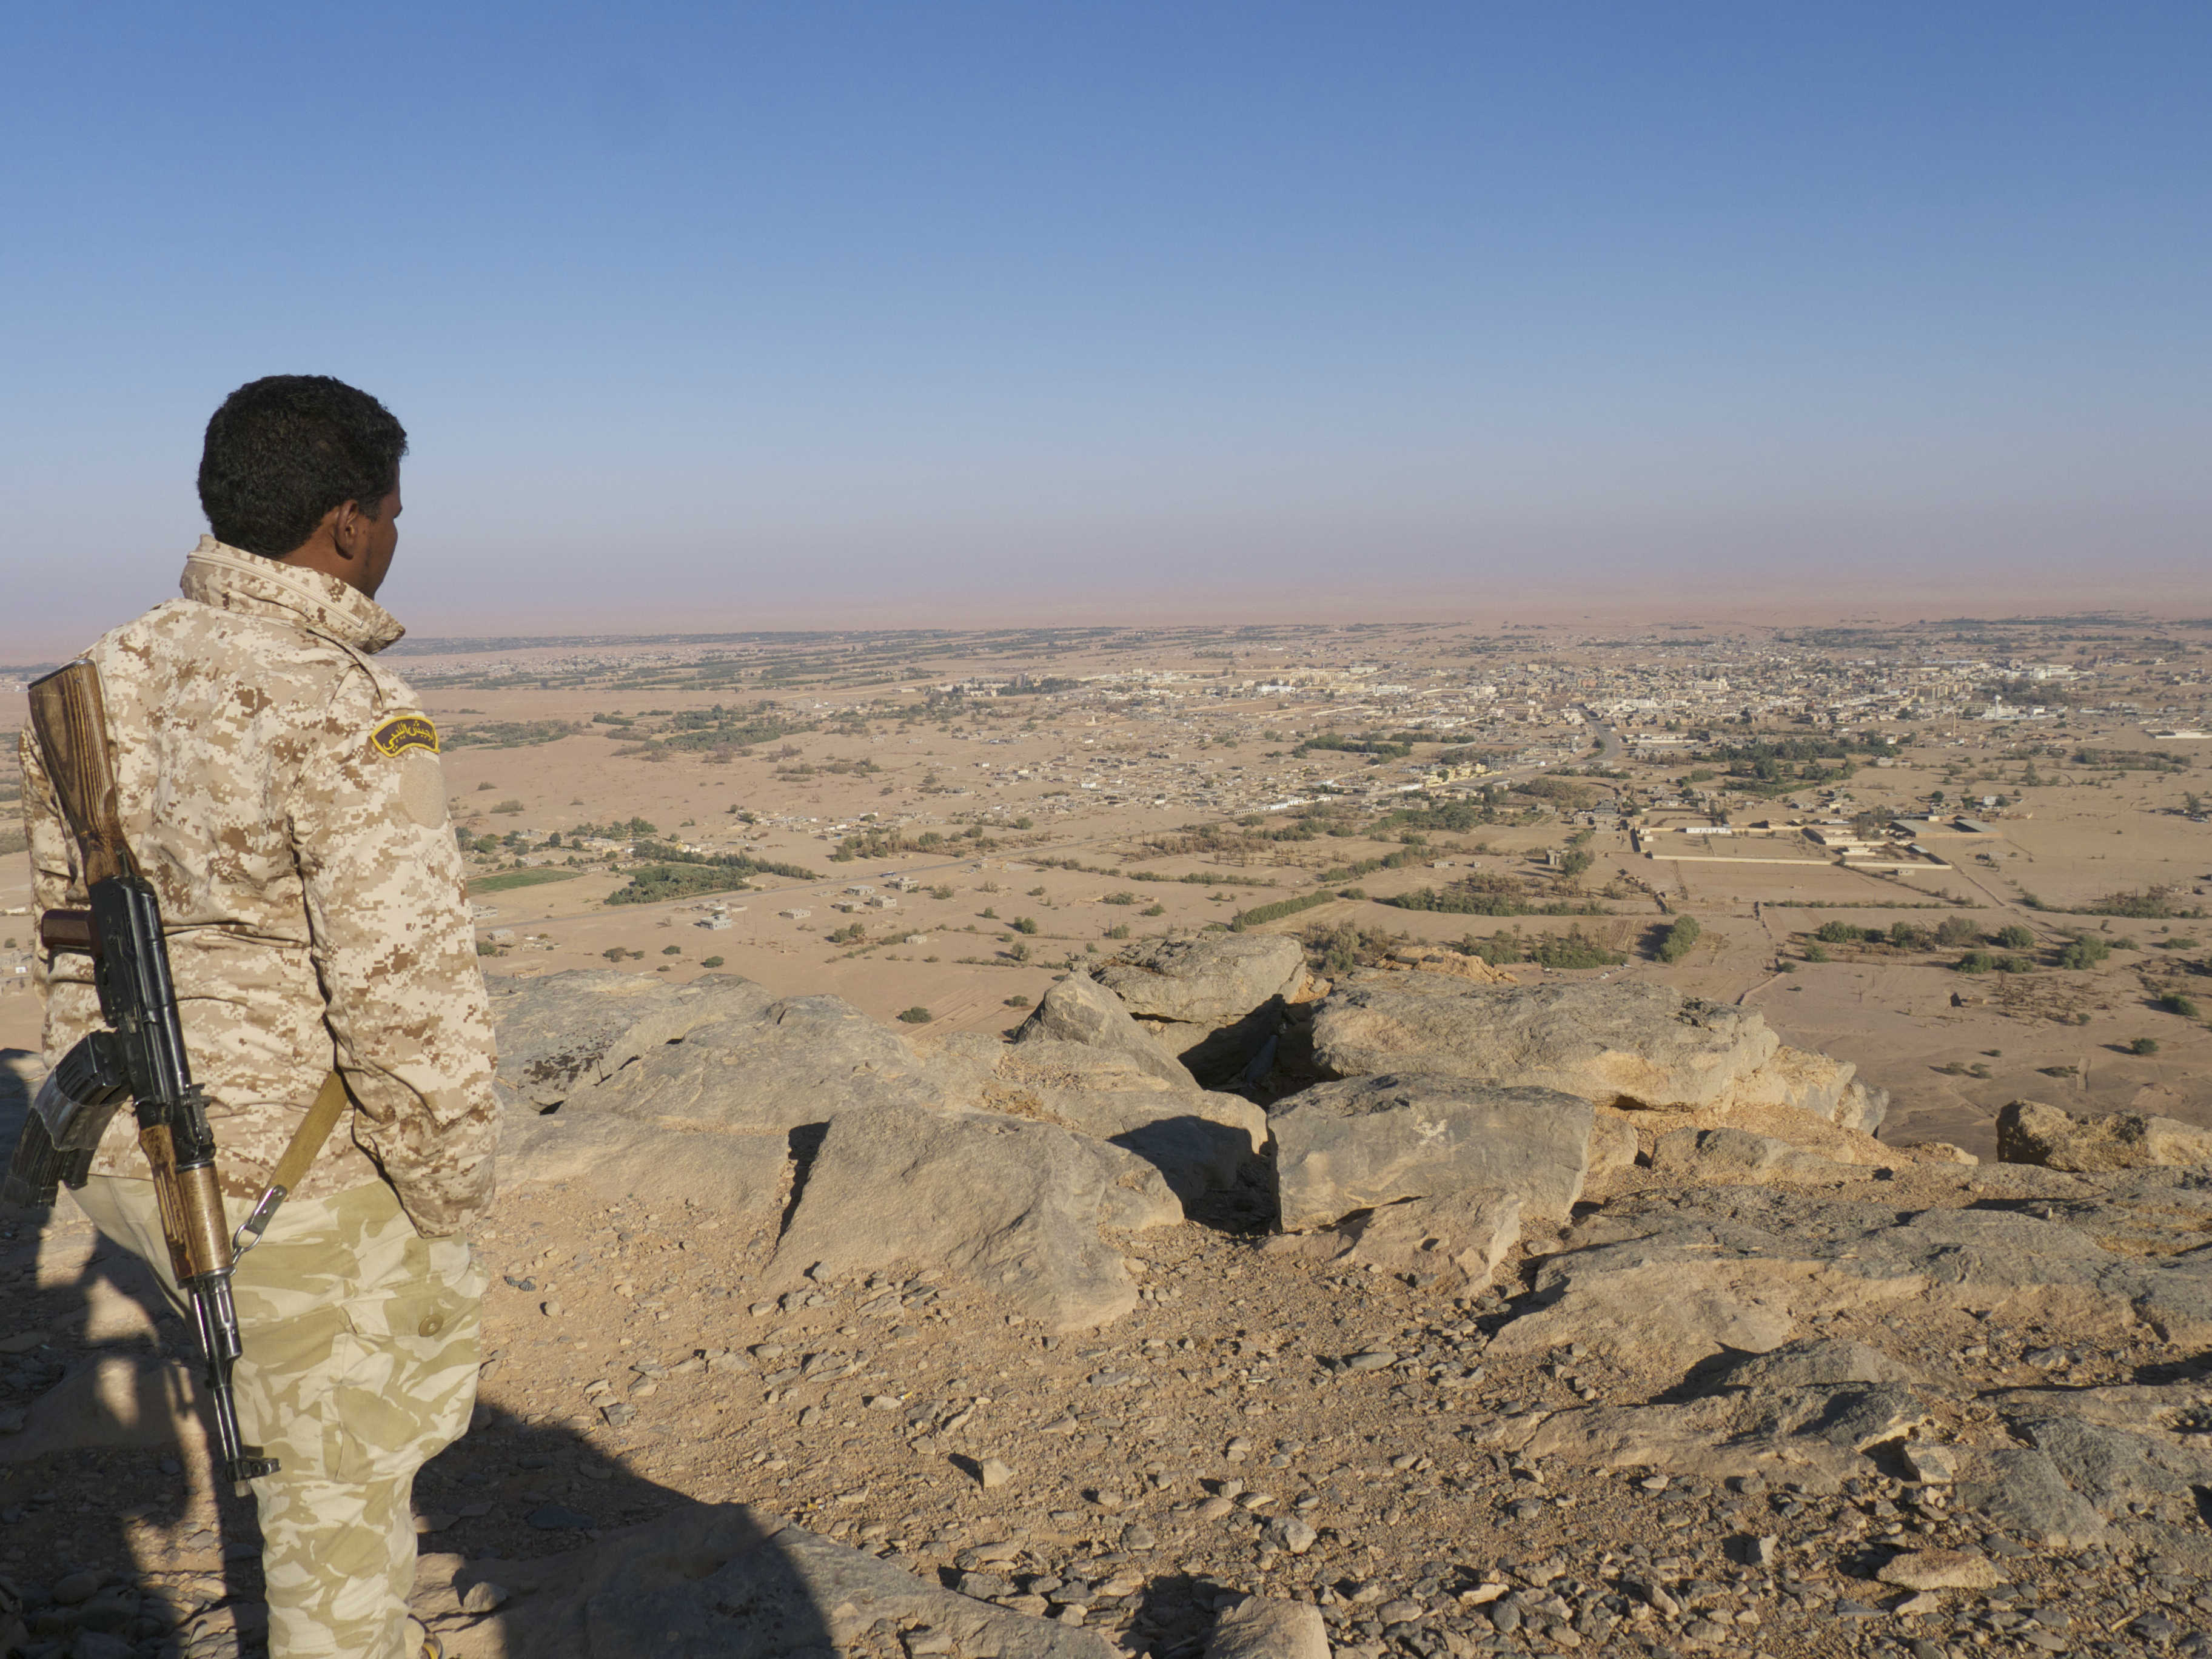 A Tuareg fighter overlooking Ubari from a mountain in 2015 (MEE/Tom Wescott)